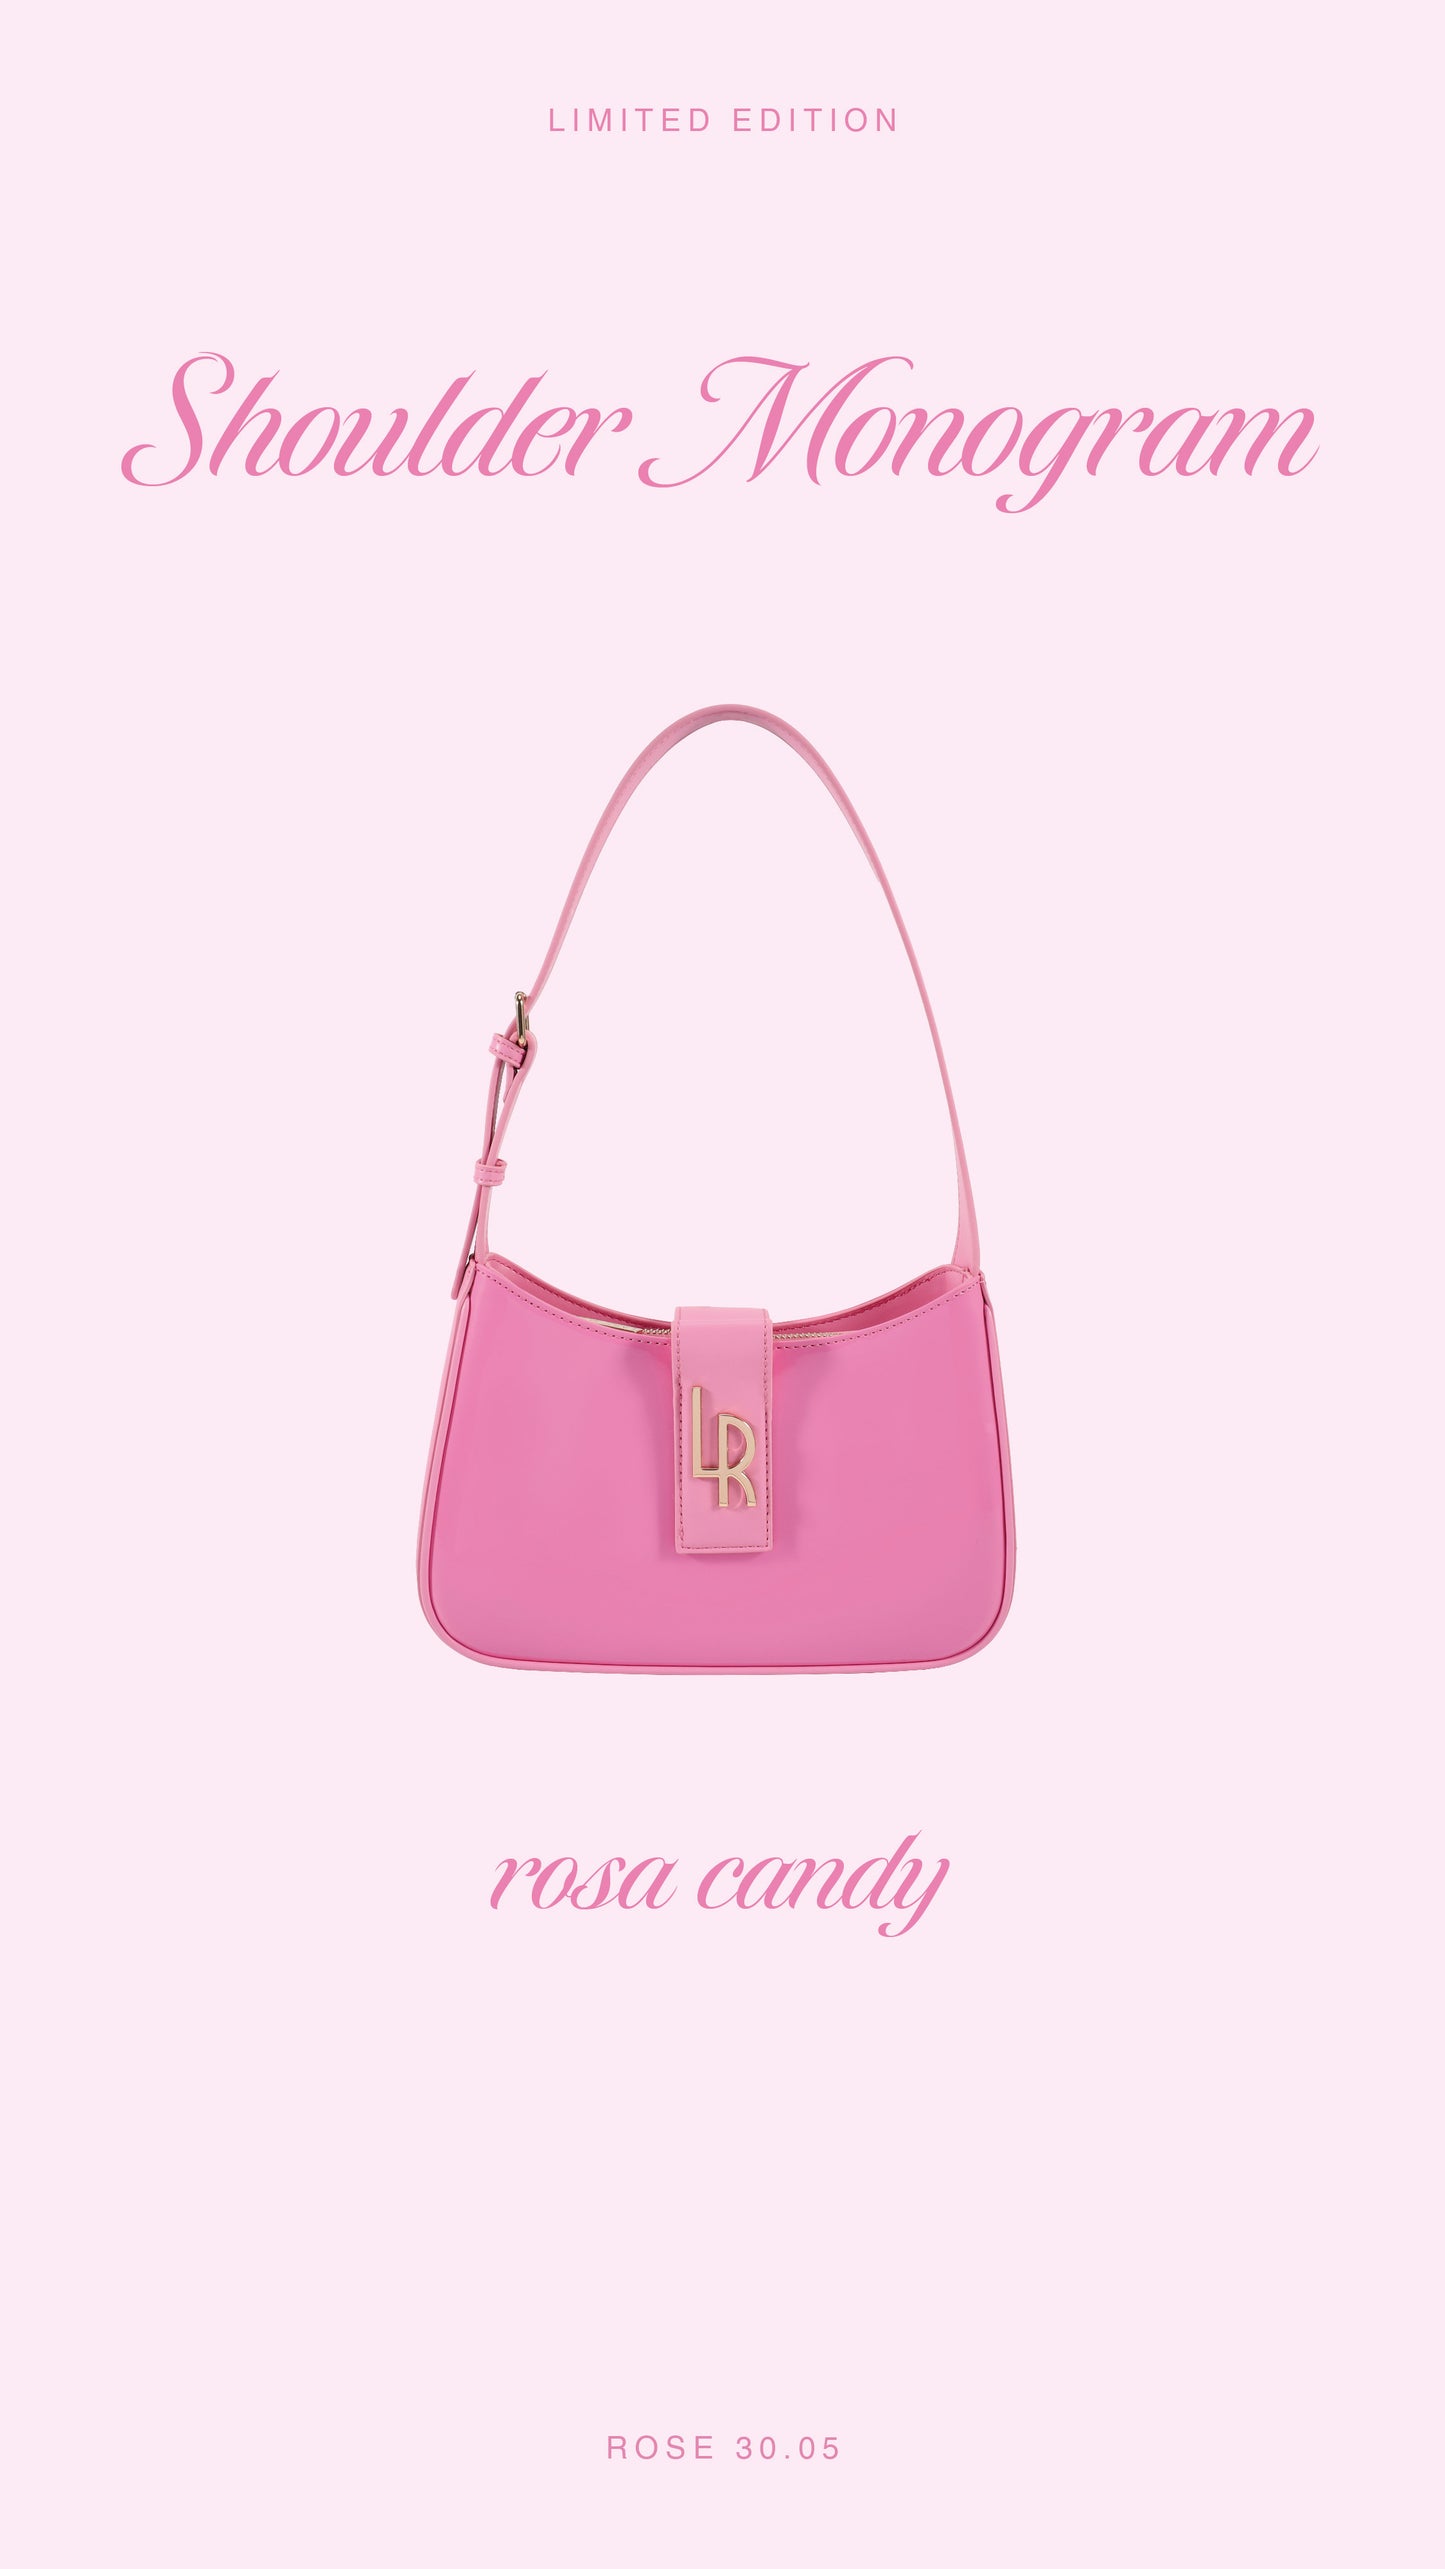 ROSE 30.05 LE - ROSE CANDY